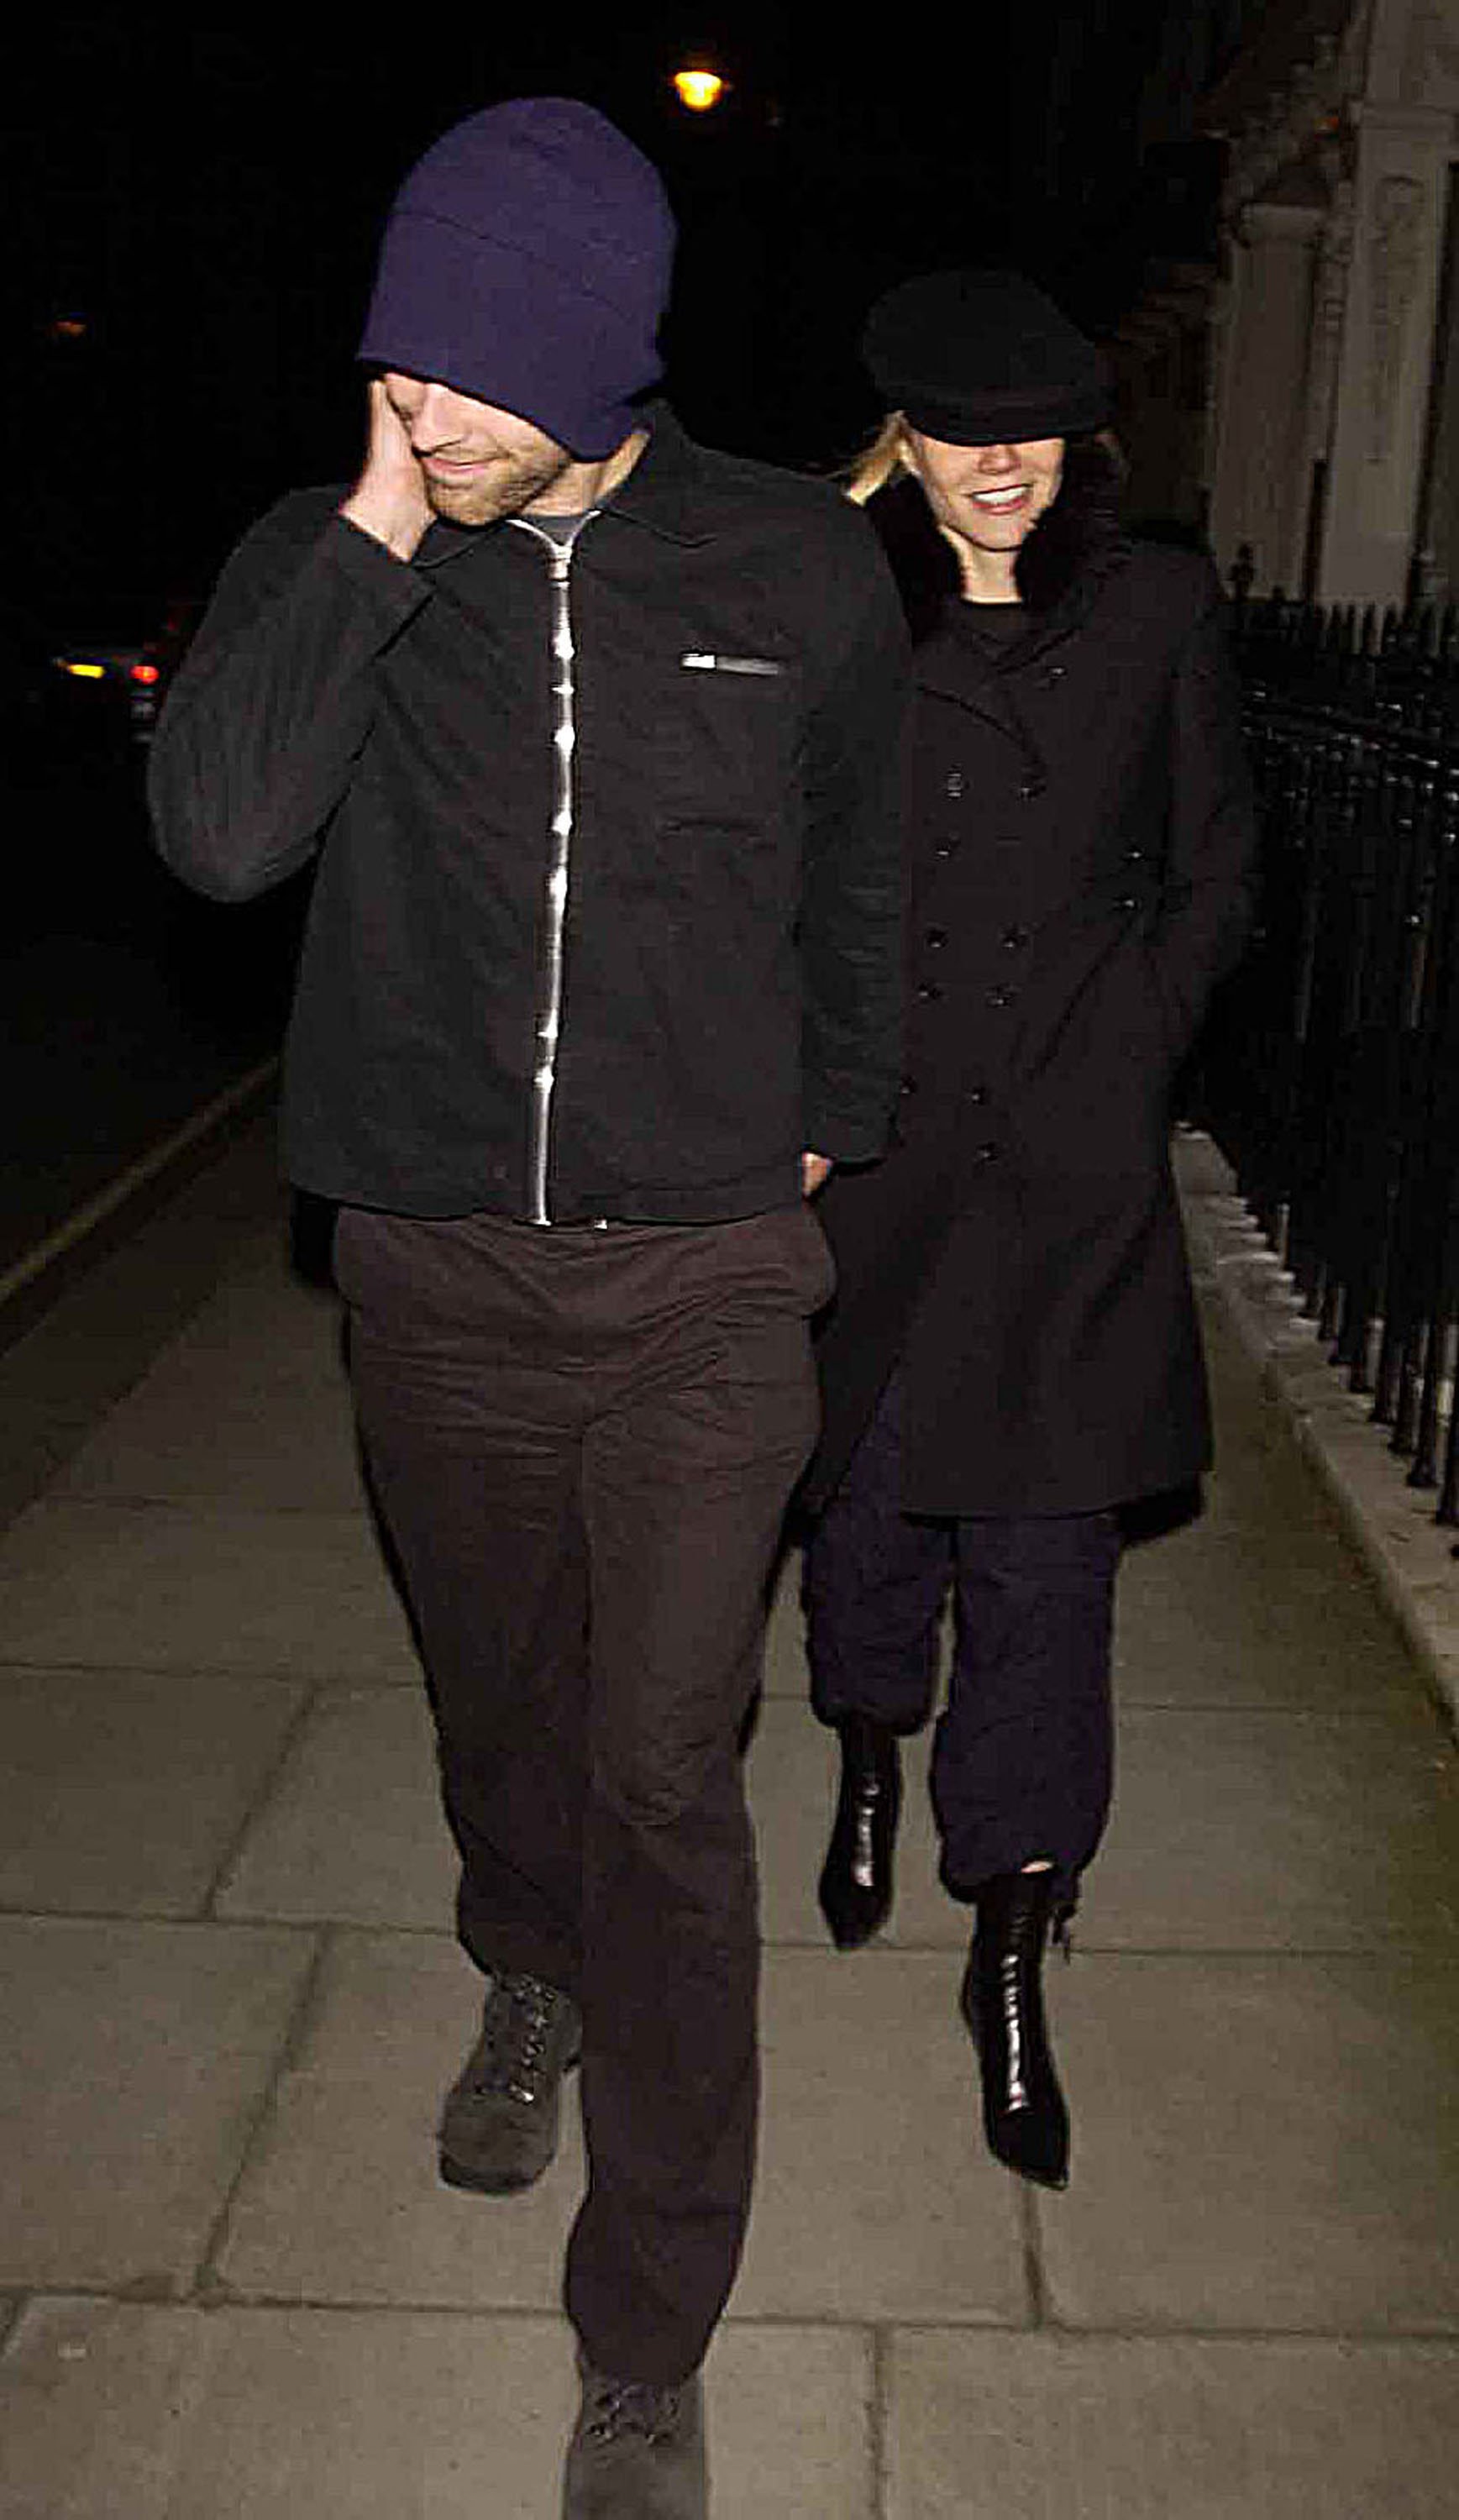 Chris Martin and businesswoman Gwyneth Paltrow spotted out sighting in the Knightsbridge area on February 19, 2005 in London, United Kingdom. / Source: Getty Images